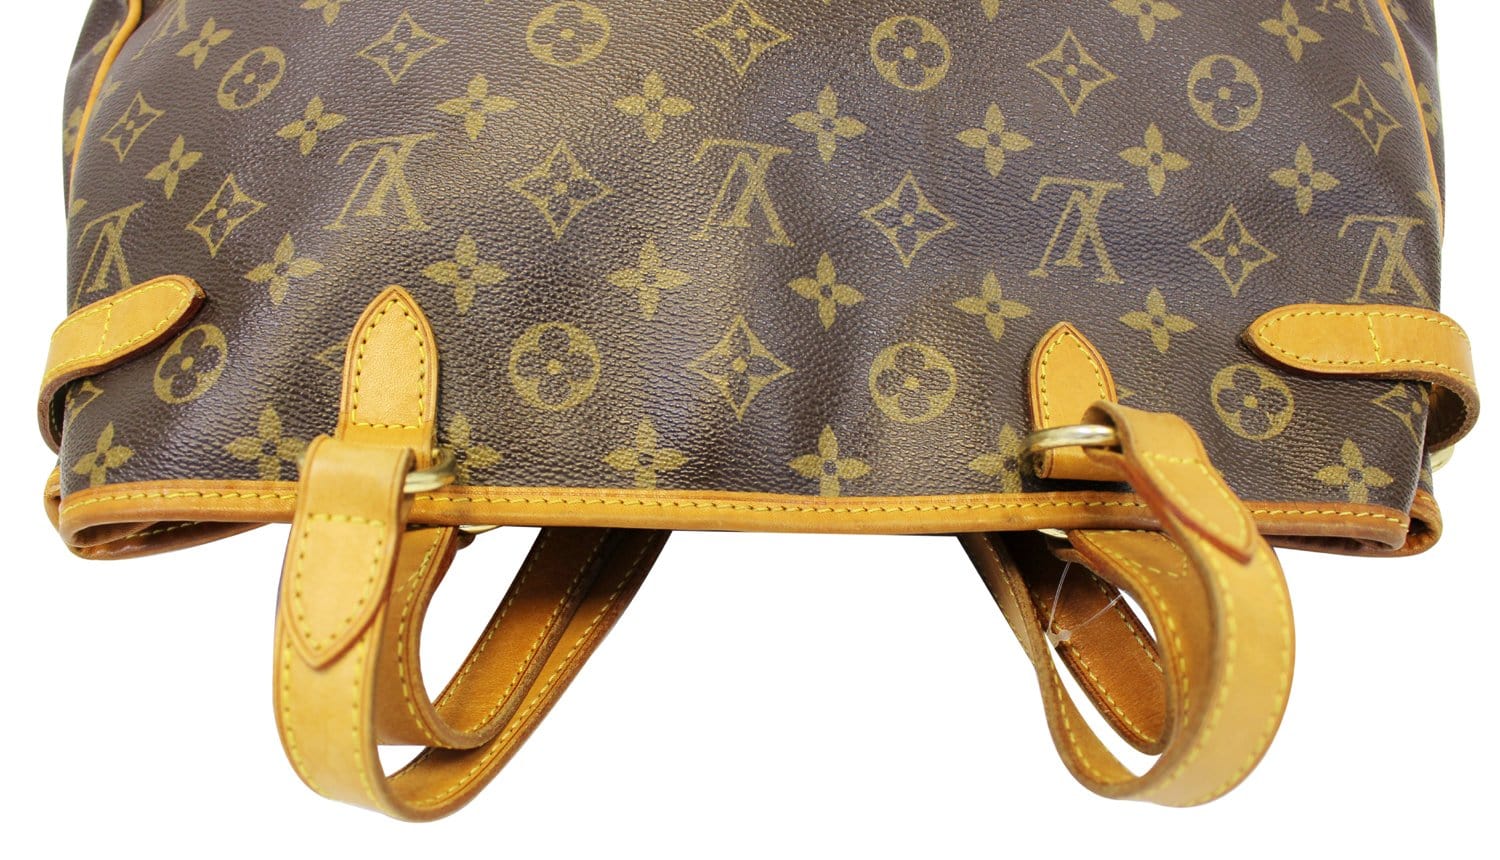 SOLD 💔Pictured: gently used and previously owned Louis Vuitton